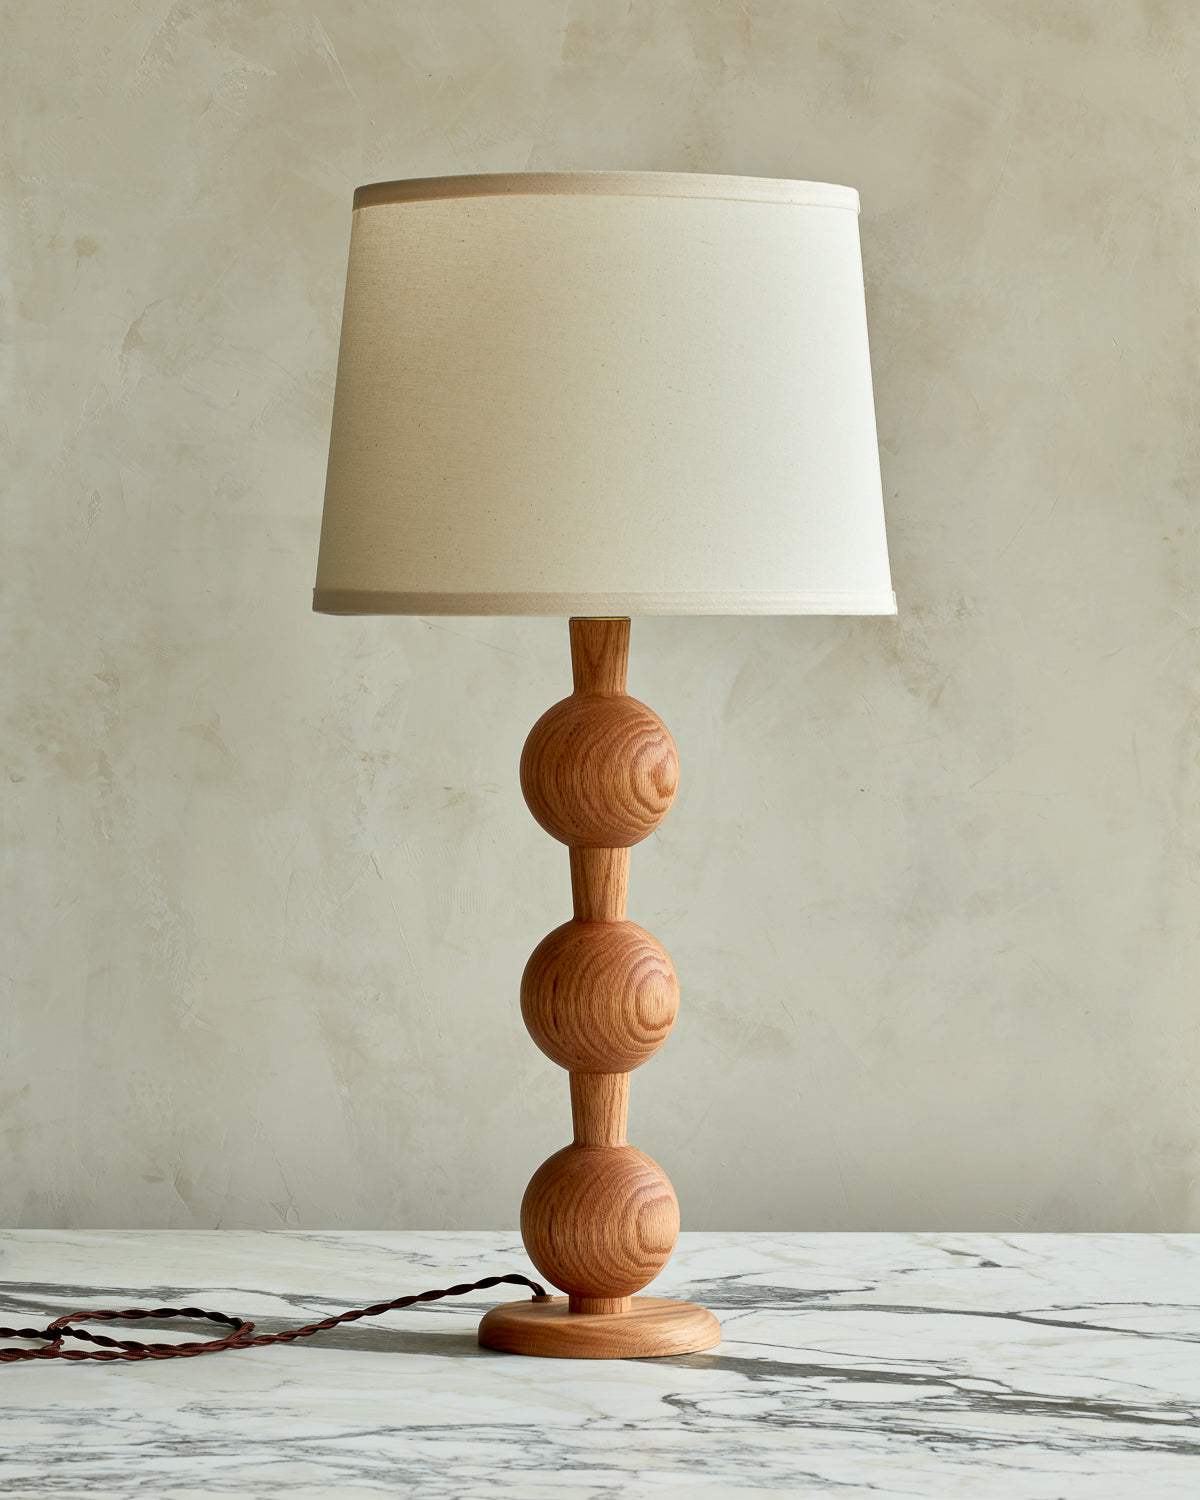 Sculptural solid wood table lamp with barbell design in natural finish with ivory linen shade